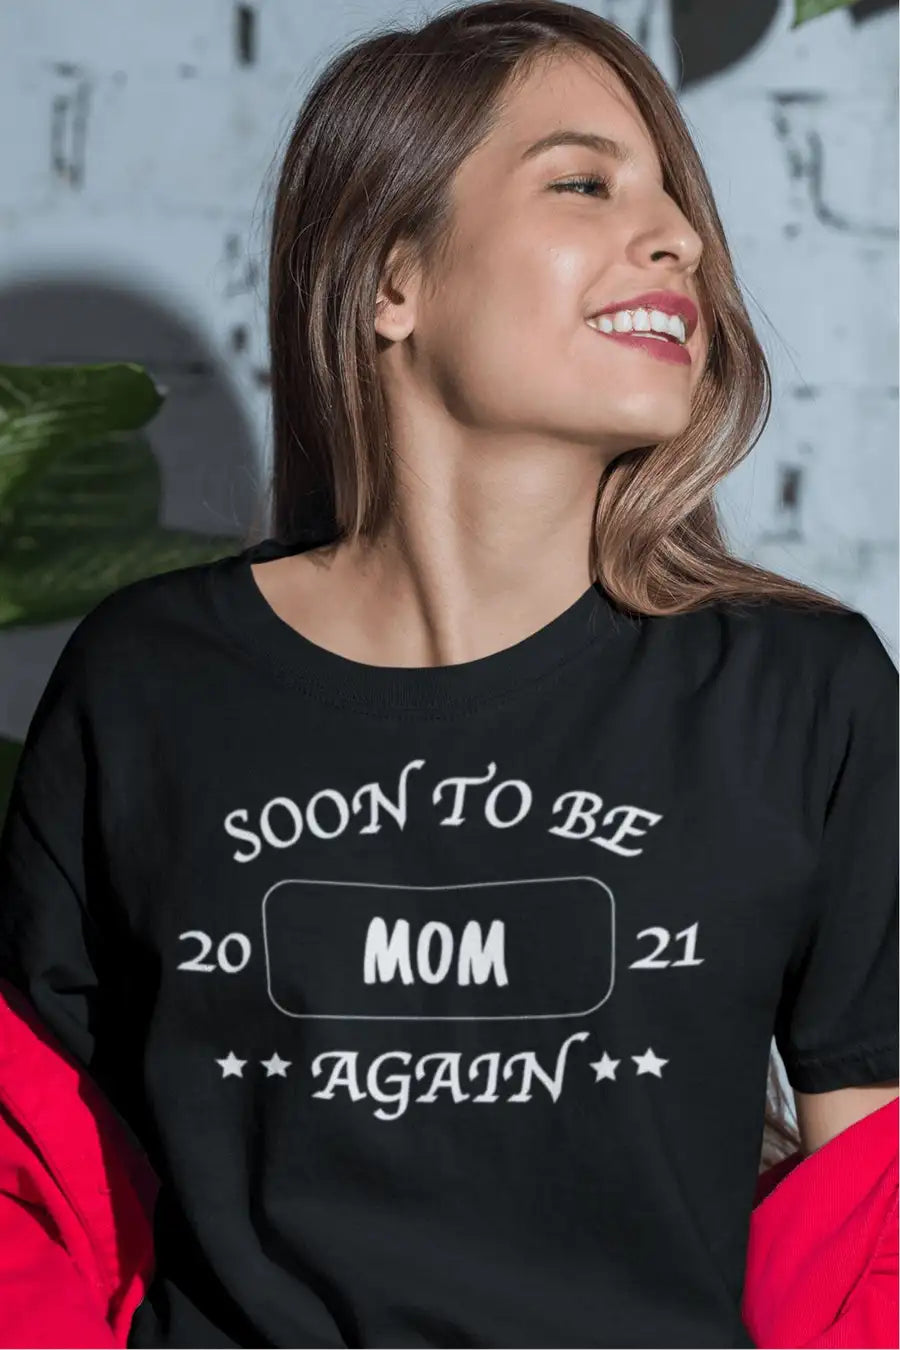 Soon to Be a Mom Again Black T Shirt for Women | Premium Design | Catch My Drift India - Catch My Drift India Clothing black, clothing, couples, female, made in india, mom, Parents, shirt, t 